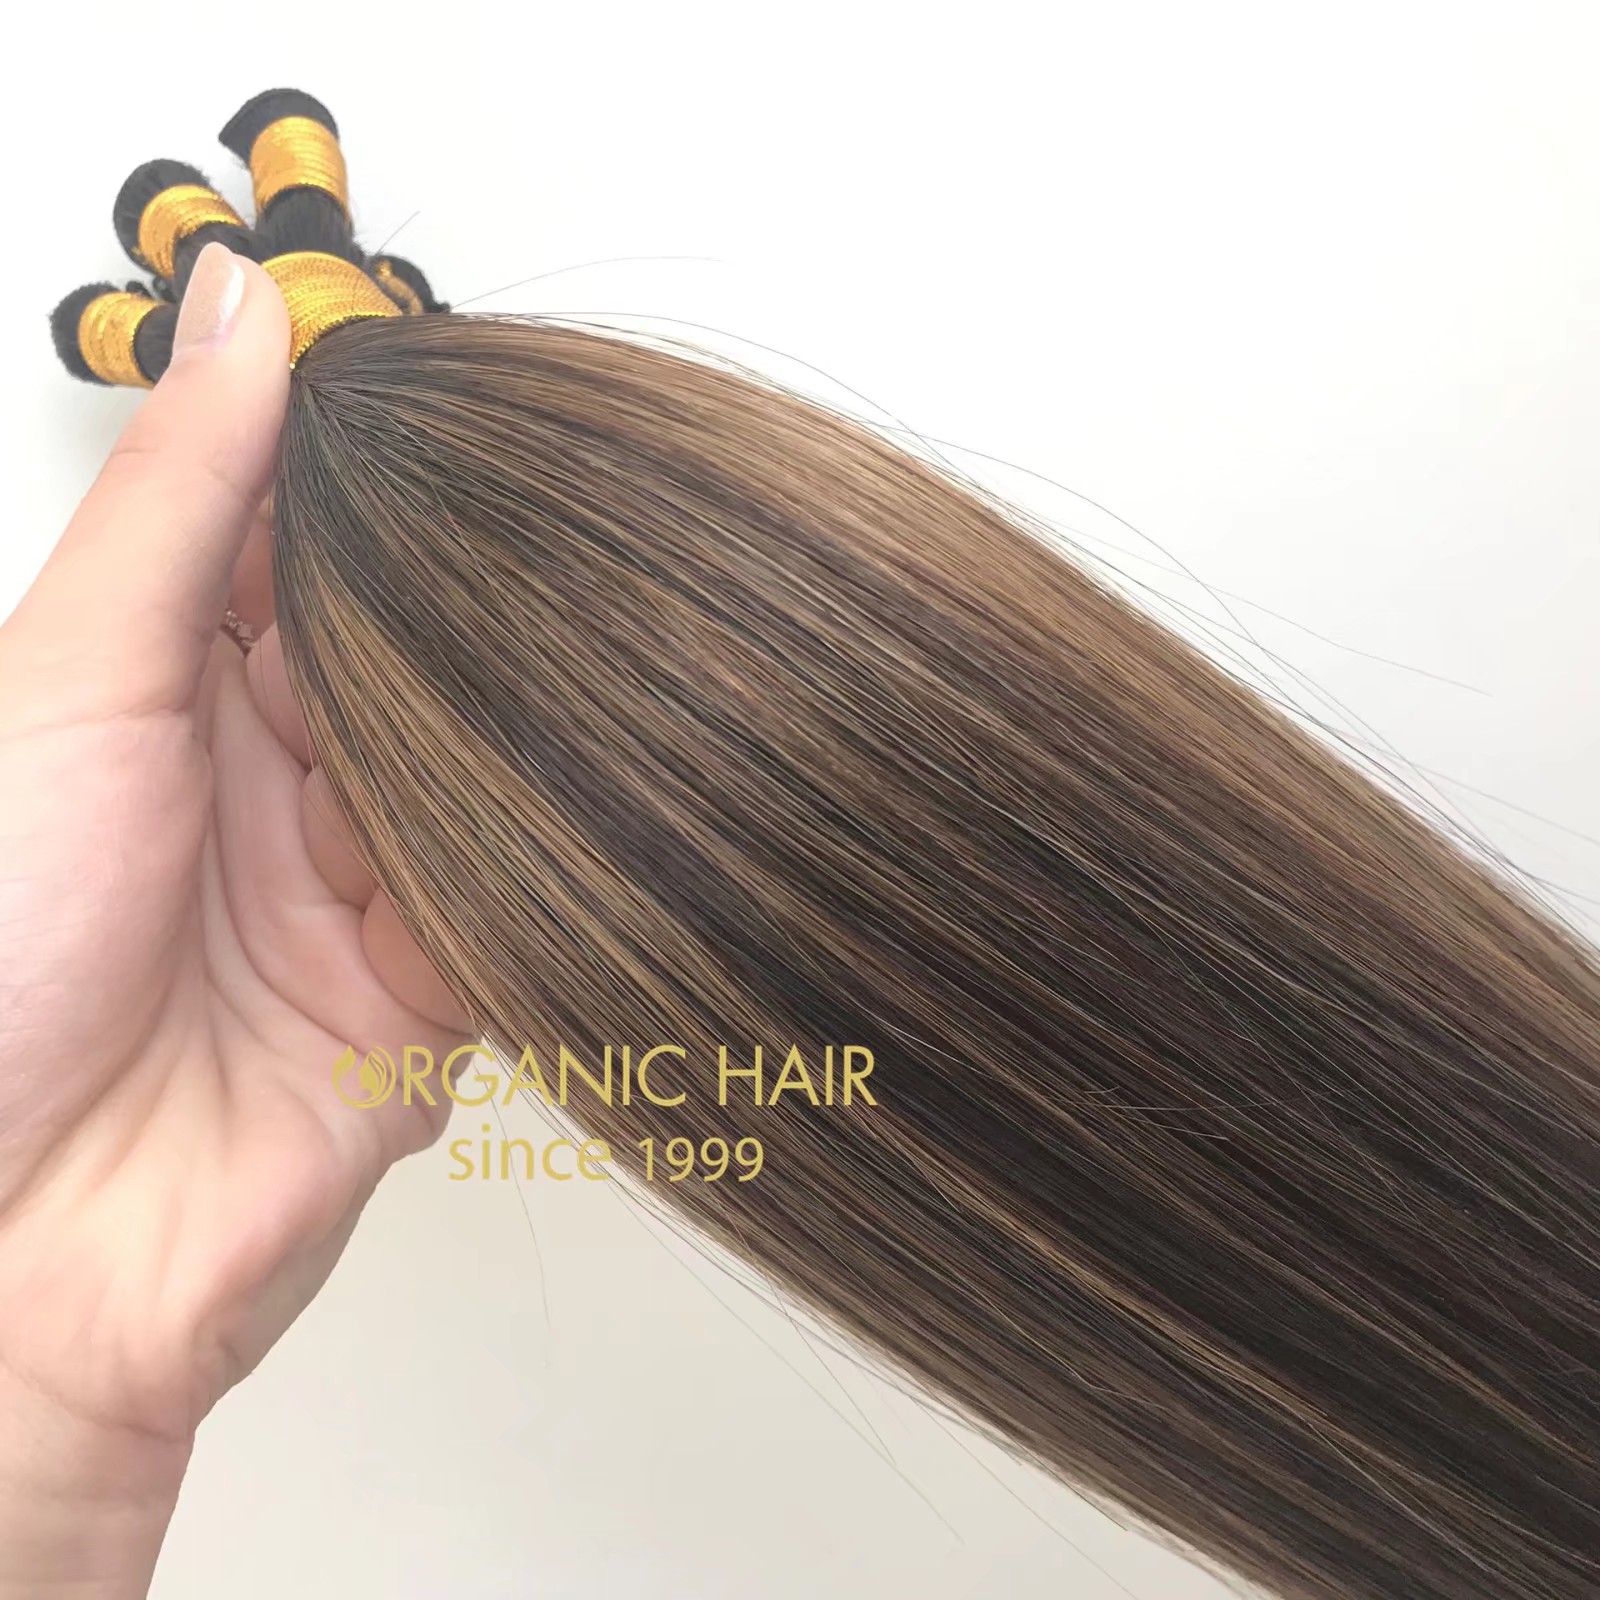 Chinese hair extensions natural row hair method supplier RB11